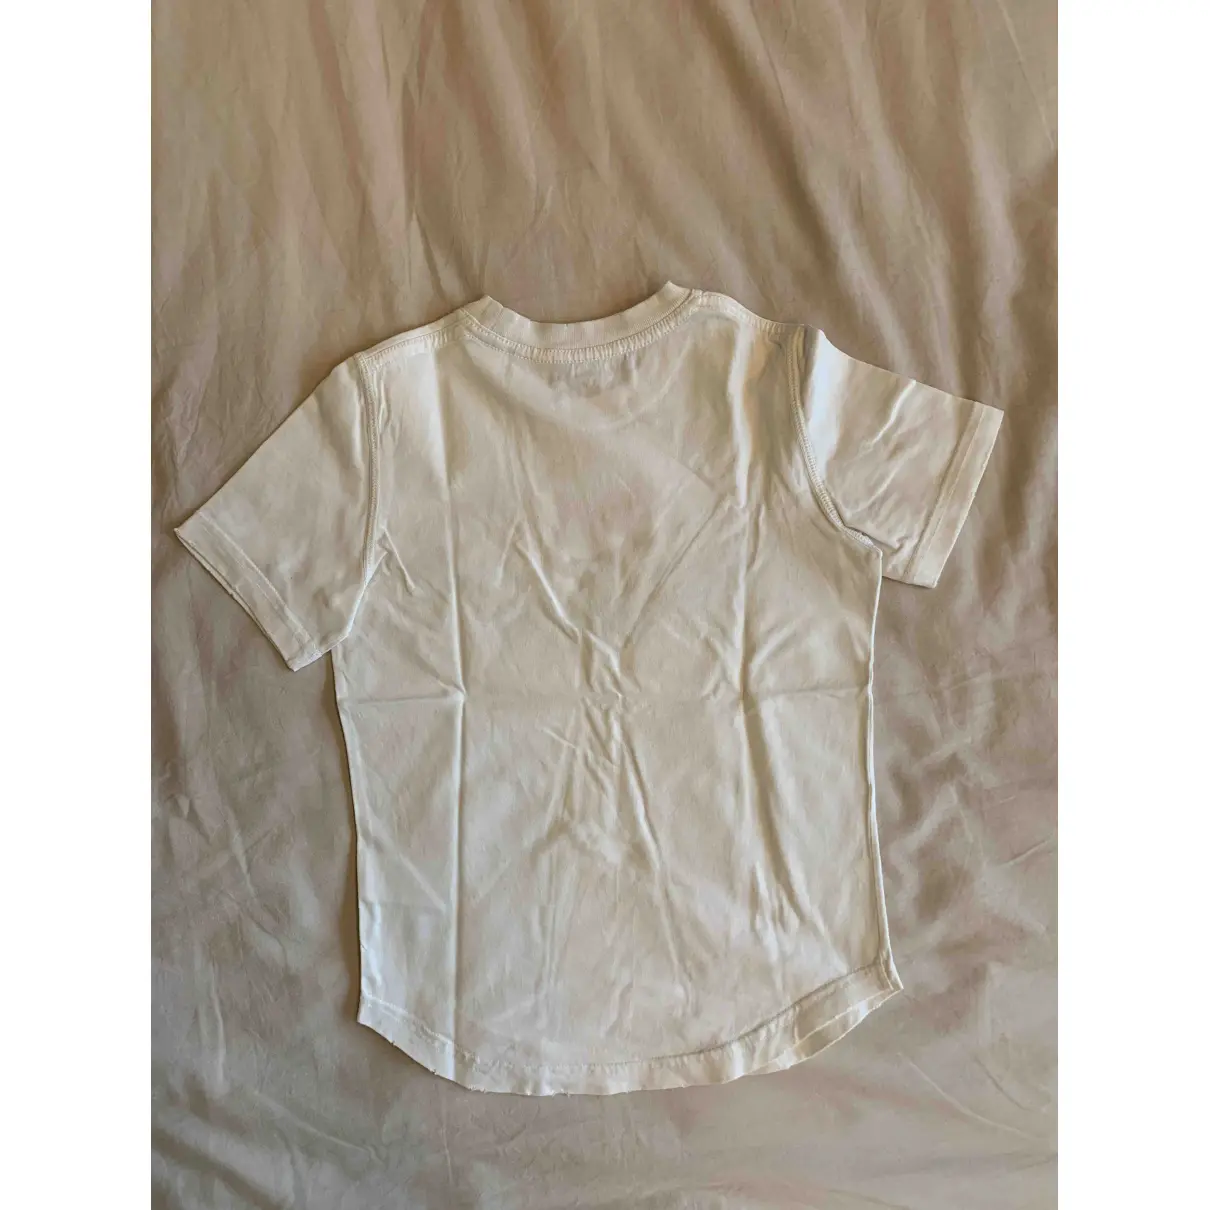 Buy Dsquared2 White Cotton Top online